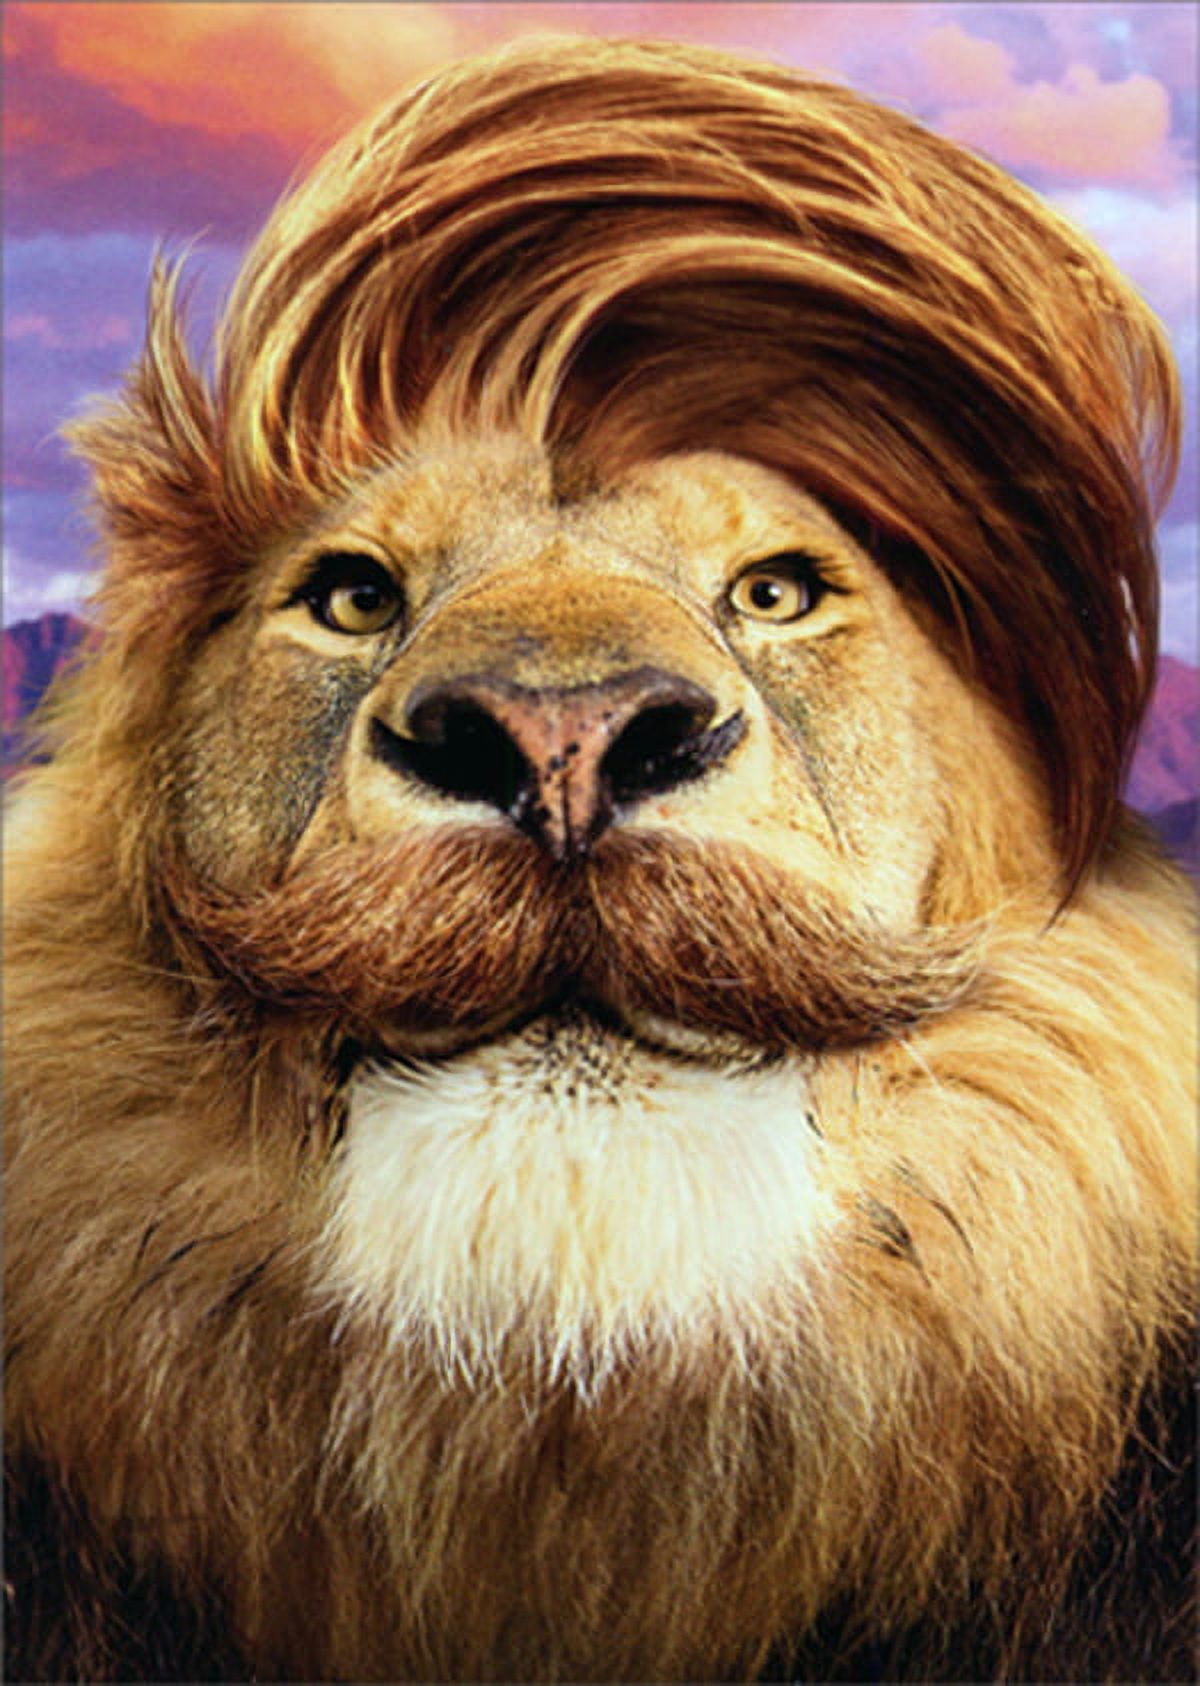 Avanti Press Lion with Comb Over and Mustache Humorous : Funny Father's Day  Card 